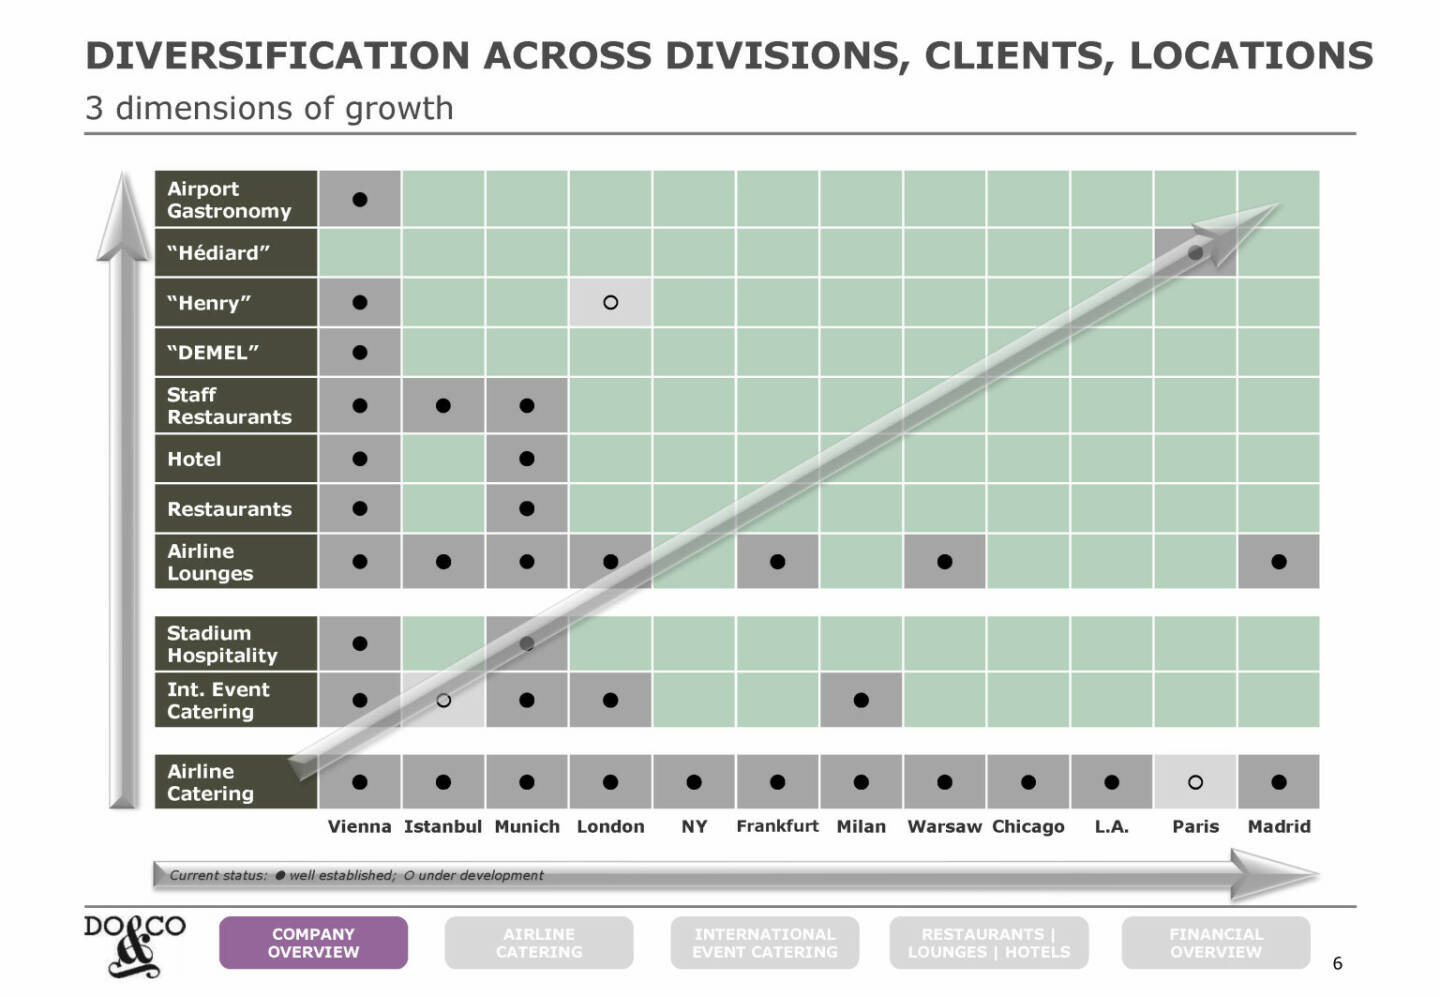 Do&Co - DIVERSIFICATION ACROSS DIVISIONS, CLIENTS, LOCATIONS